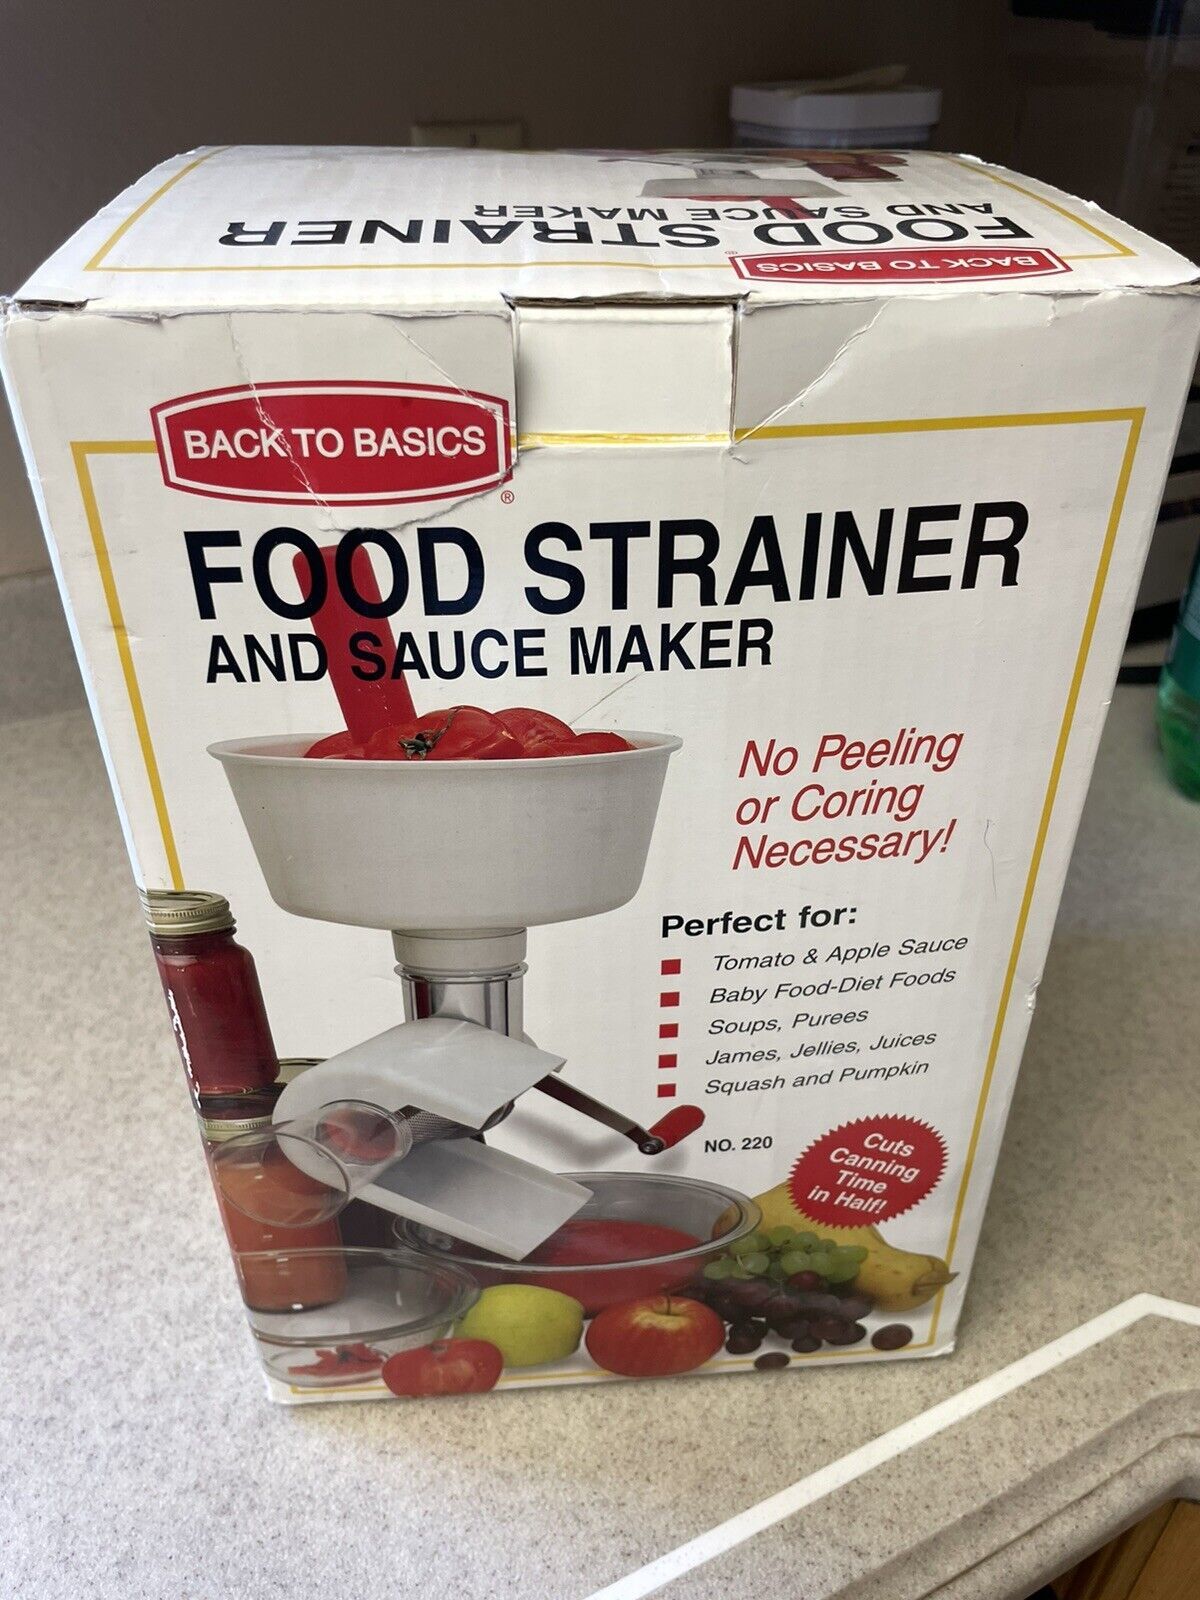 Back To Basics Food Strainer & Sauce Maker With Box Needs New Gasket - $34.00